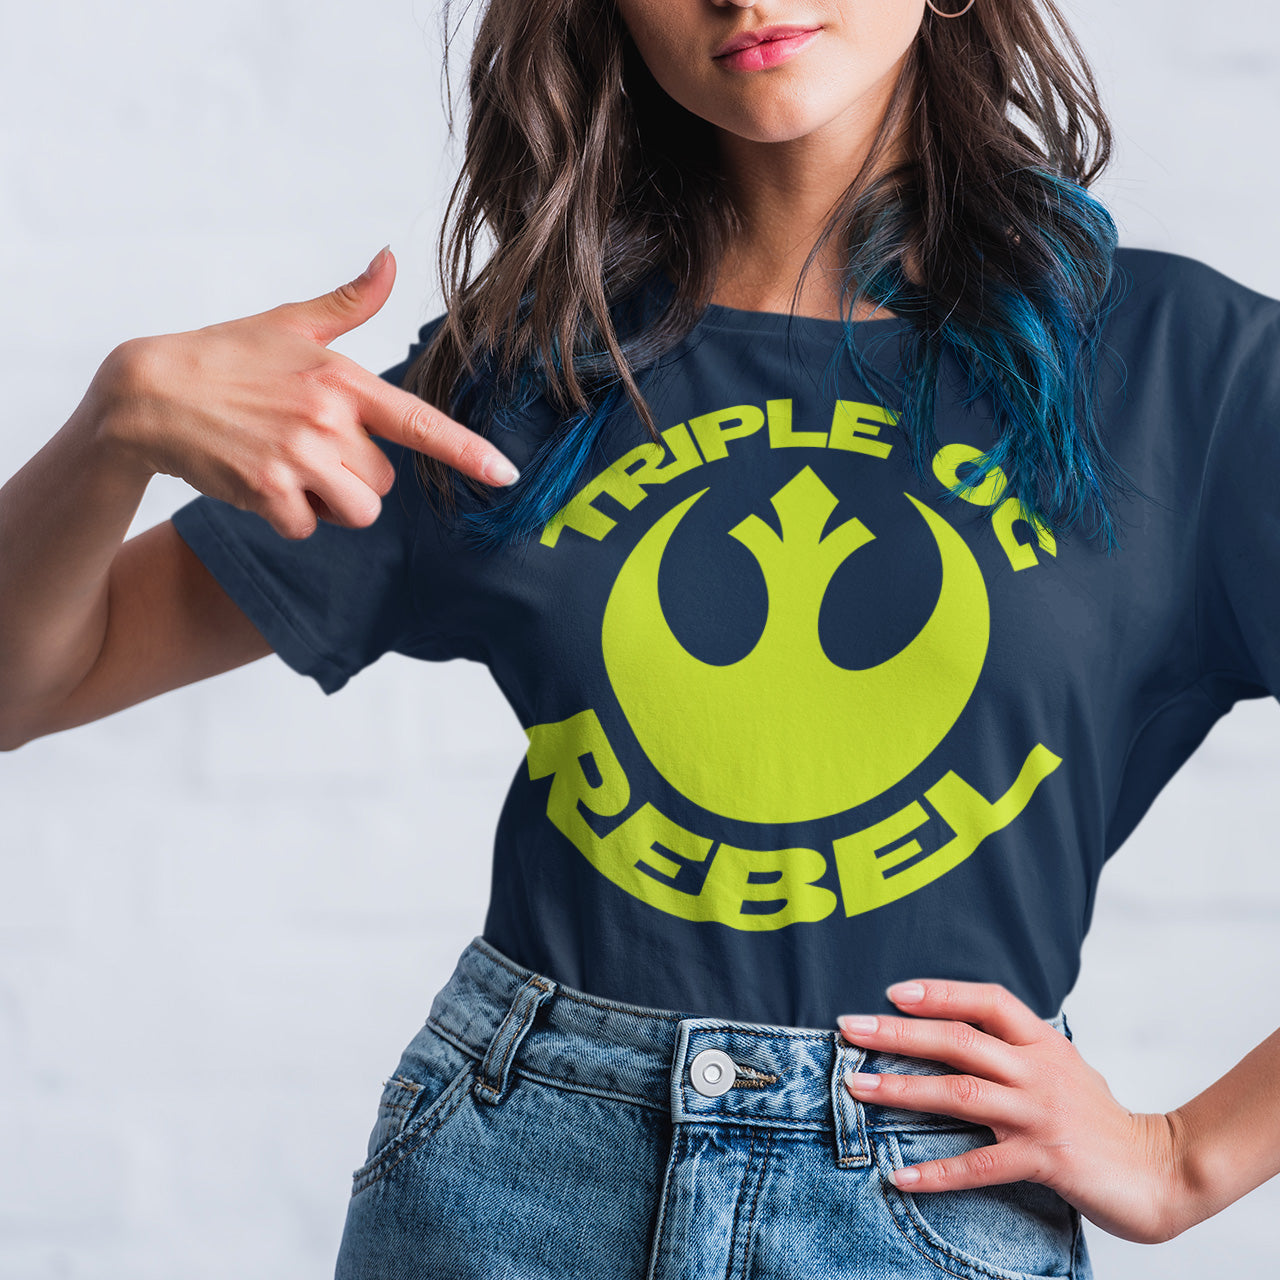 Woman pointing at her Triple OG Rebel t-shirt